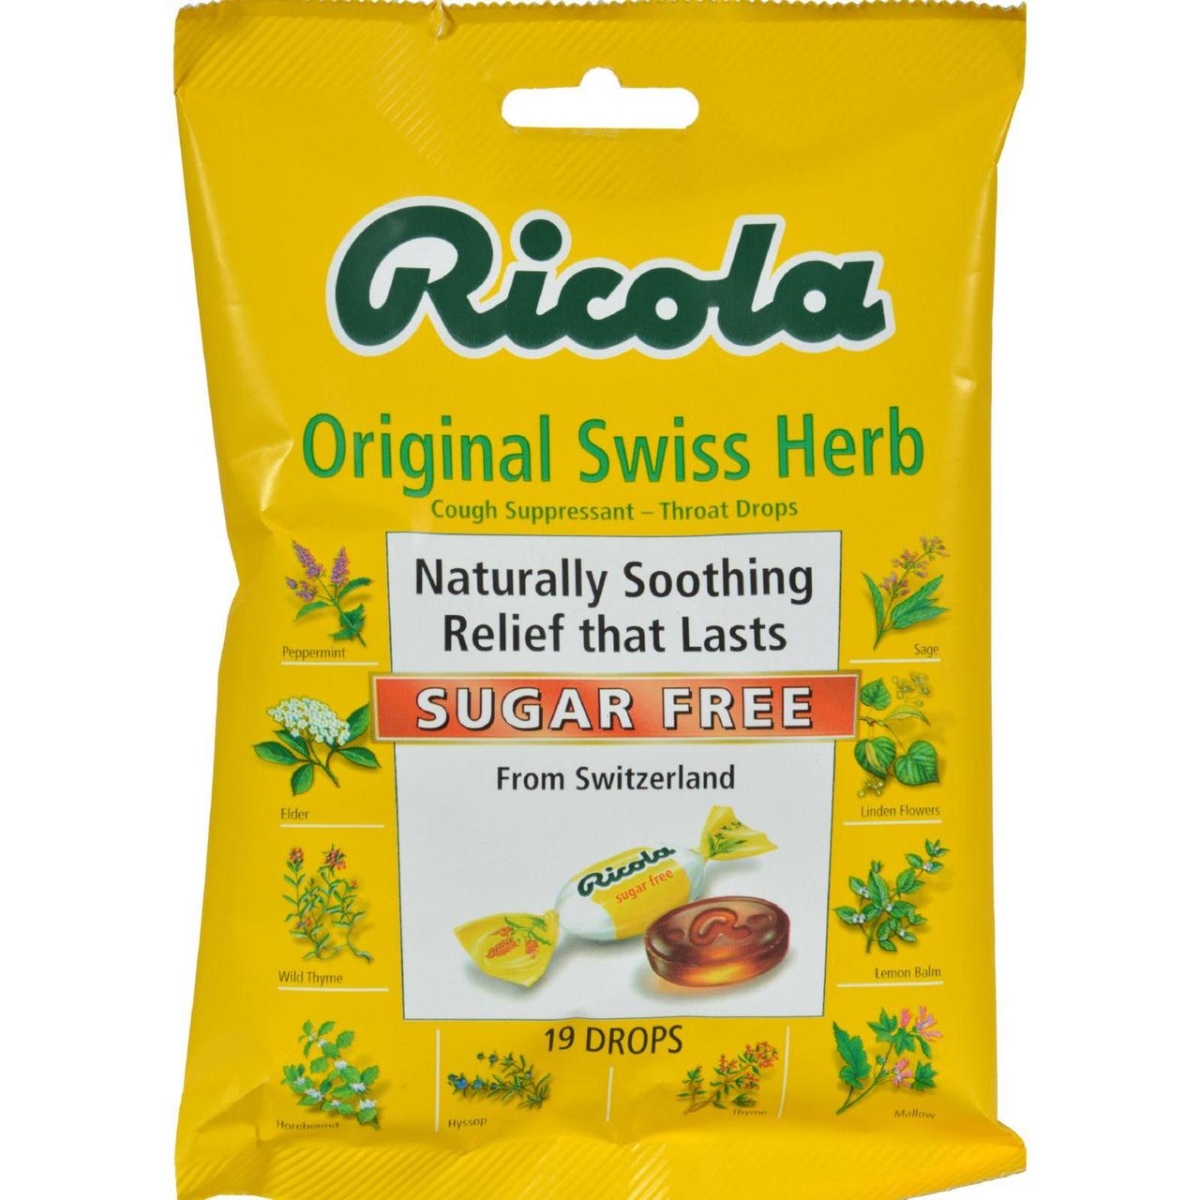 Hg0654772 Swiss Herb Sugar Free Drops - Pack Of 19, Case Of 12